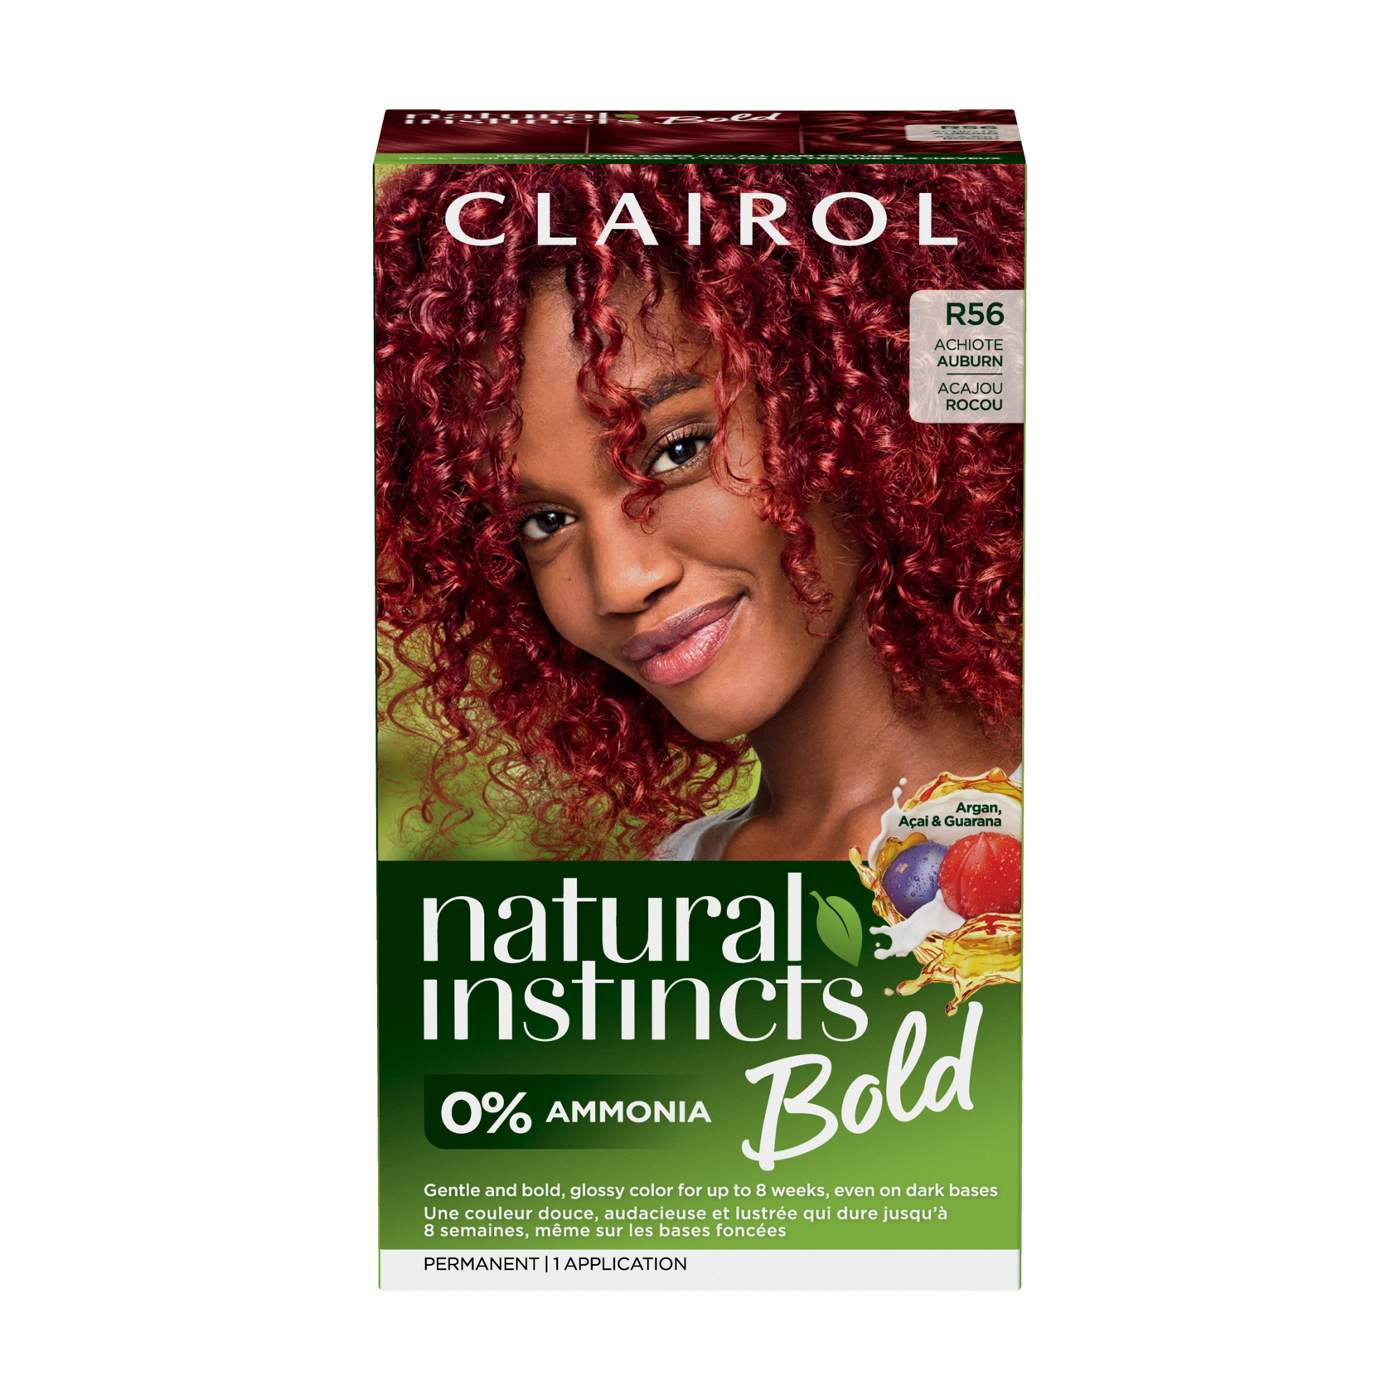 Clairol Natural Instincts Bold Permanent Hair Color - R56 Achiote Auburn ; image 1 of 6